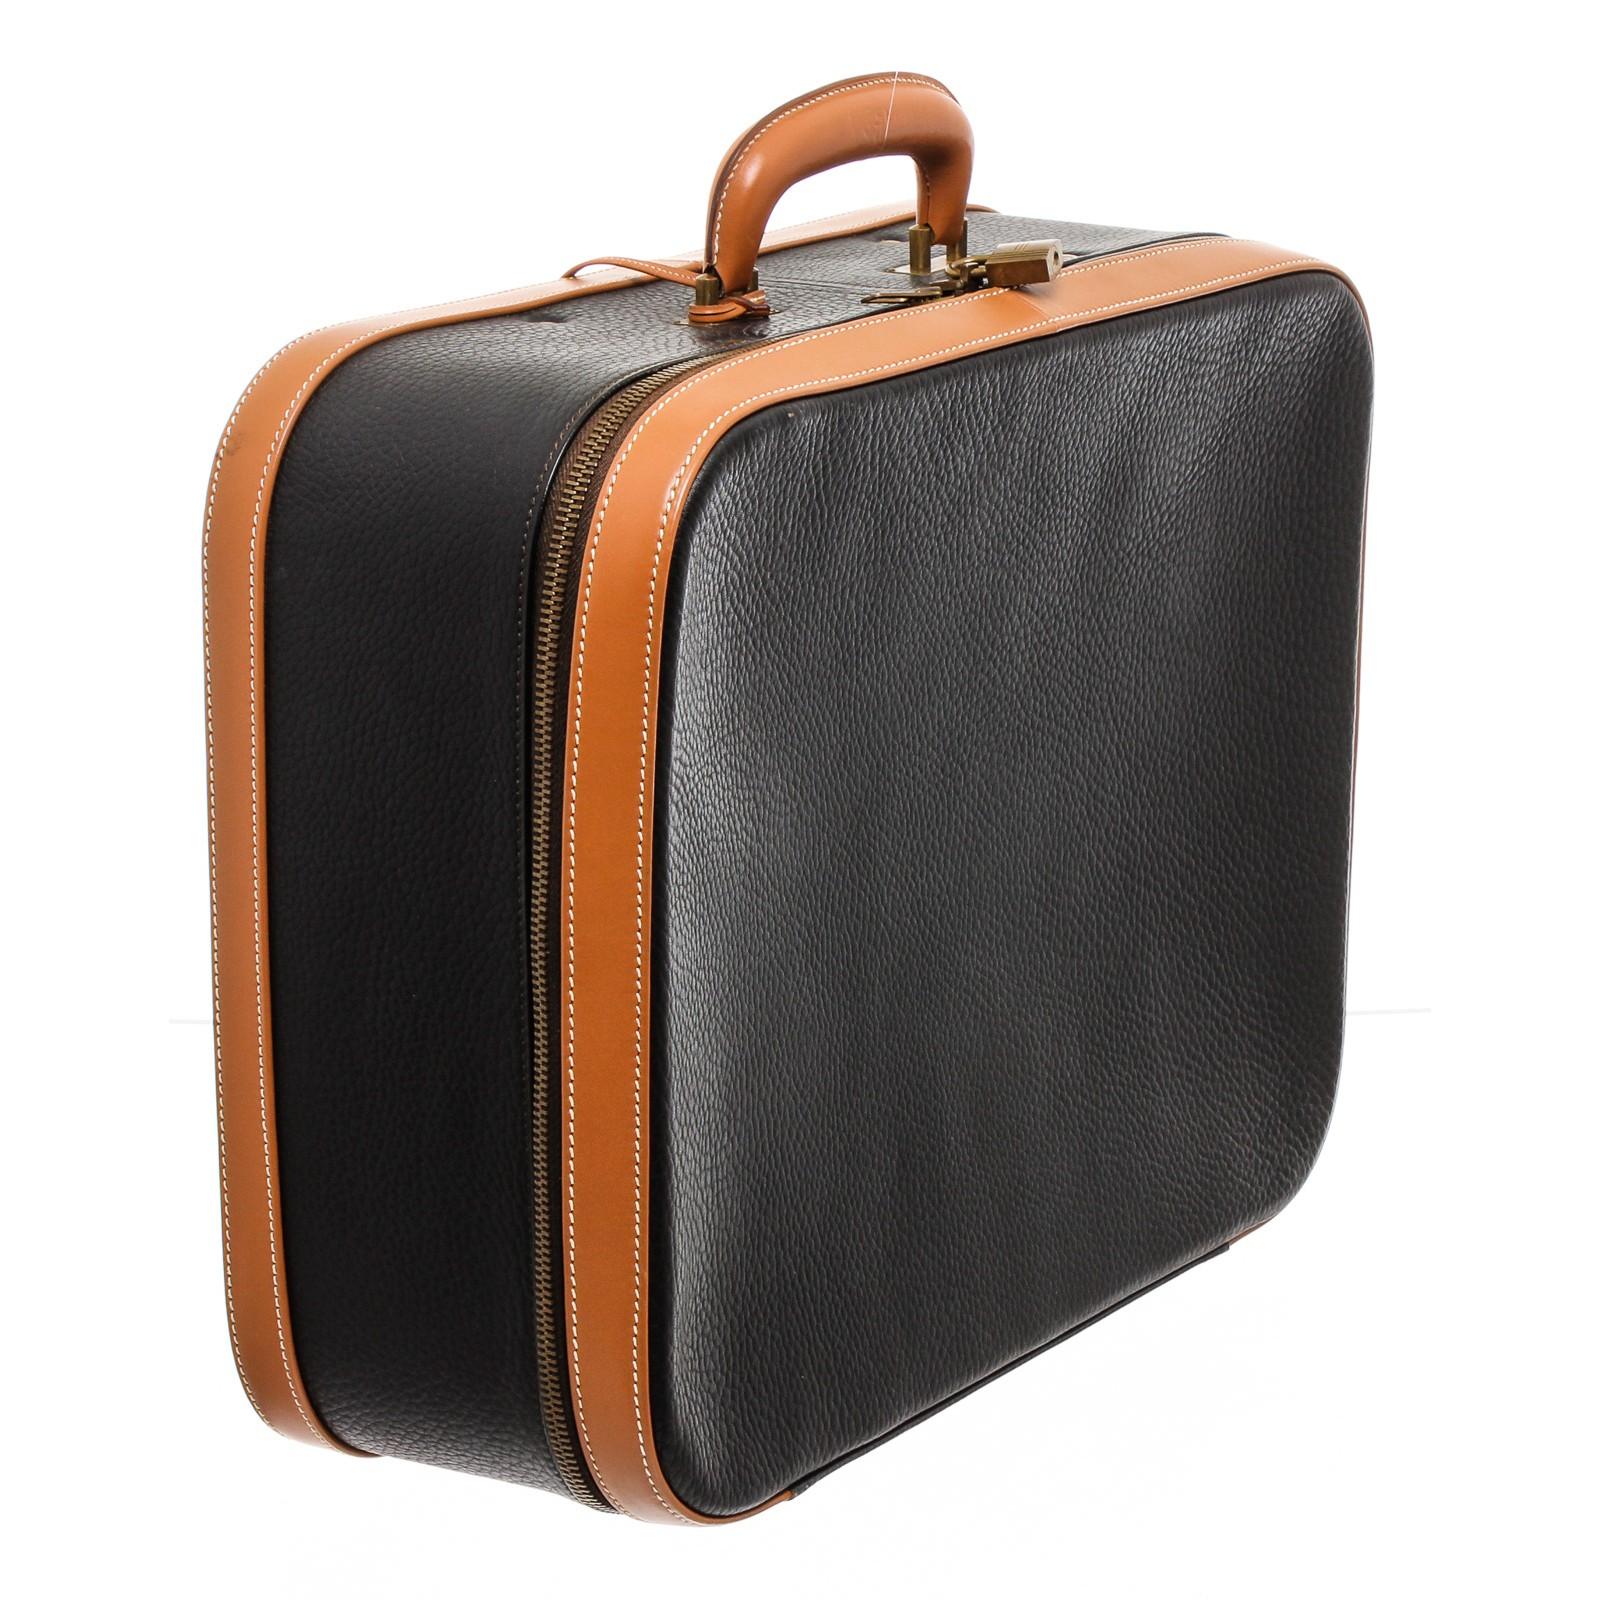 Hermes black pebbled leather suitcase with brown trim, brass colored hardware with lock and keys, cream brushed cotton interior lining, dual leather interior straps and divider, two way zippered closure. 16214MSC.